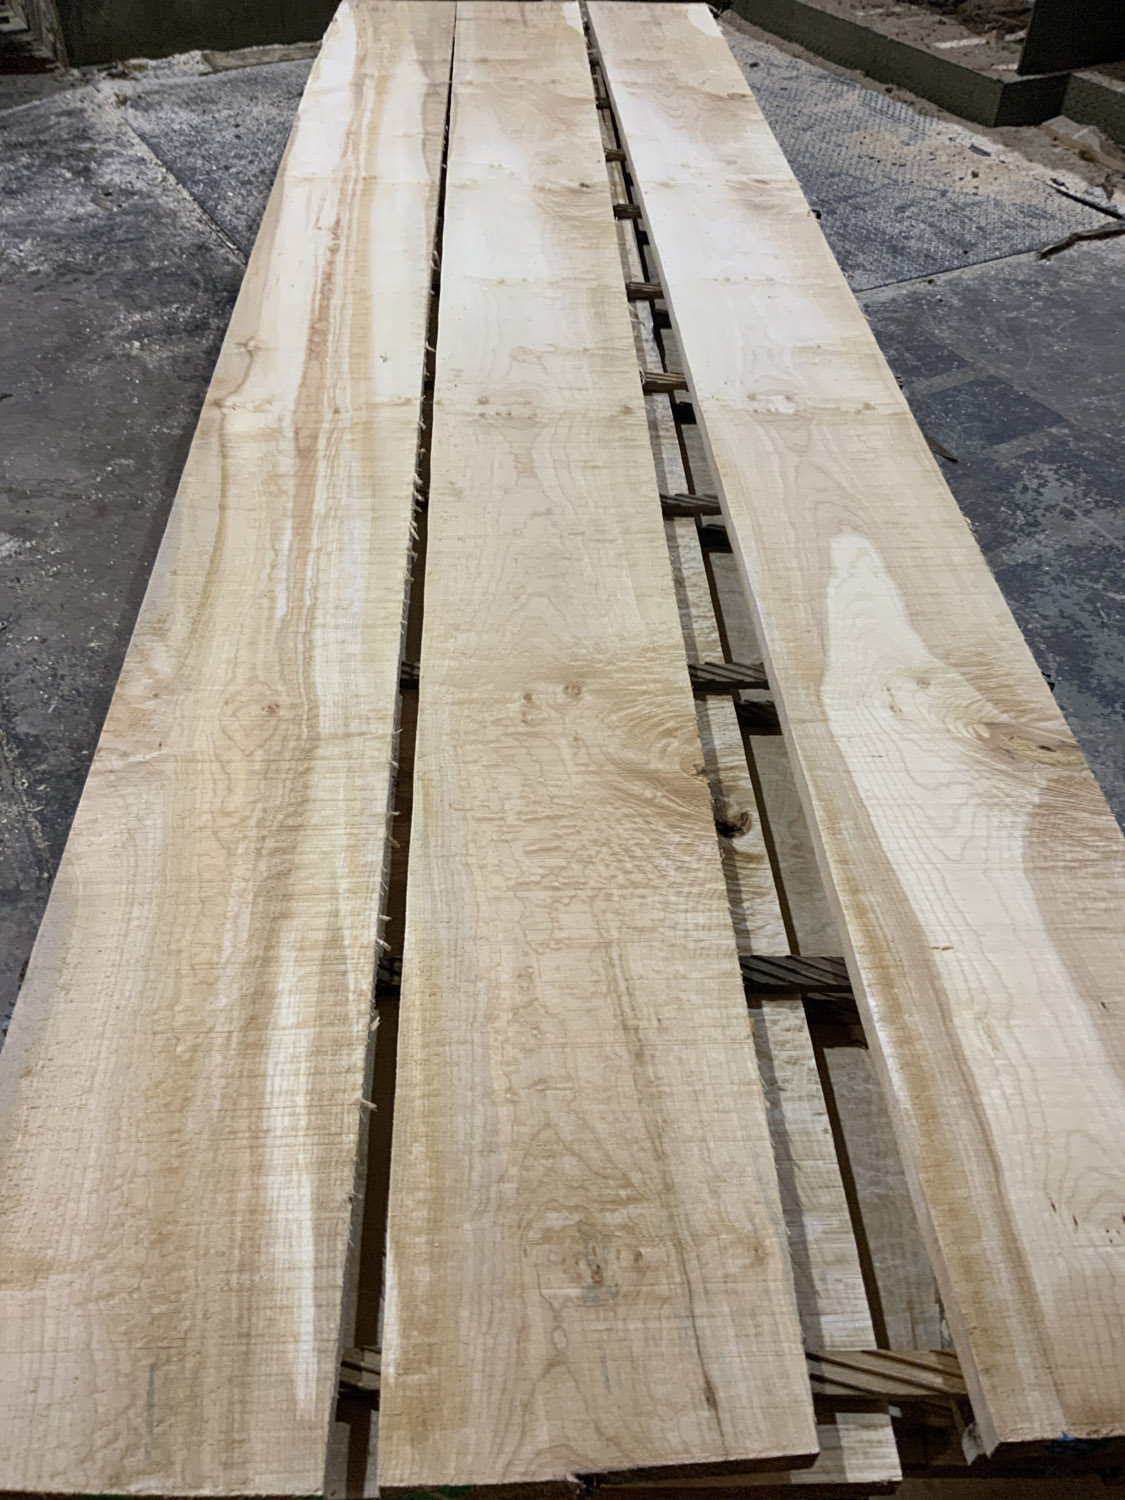 AAAAA Quilted Maple Lumber – Cook Woods